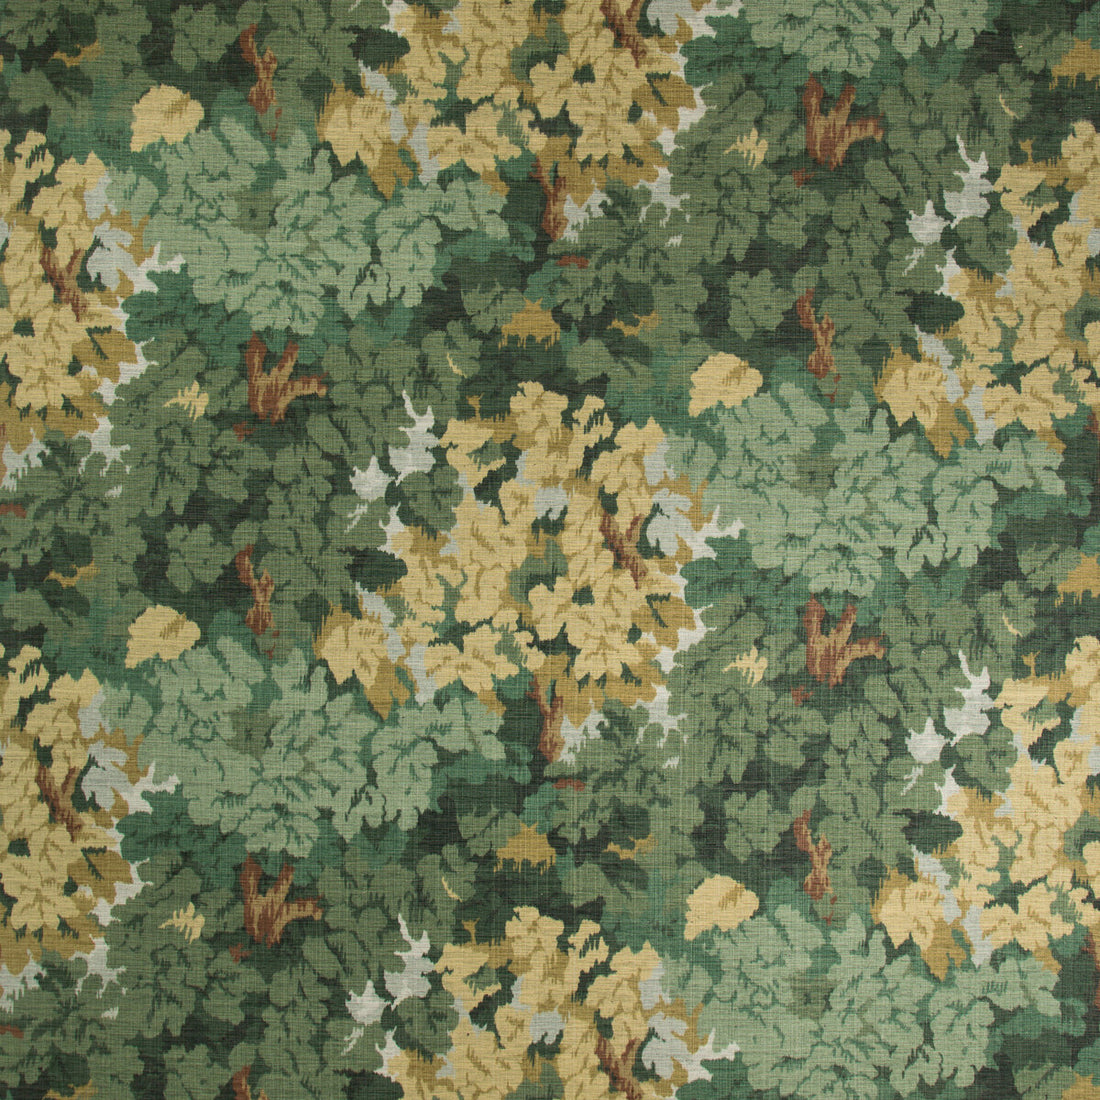 Arley Print fabric in ivy color - pattern 2019101.34.0 - by Lee Jofa in the Manor House collection